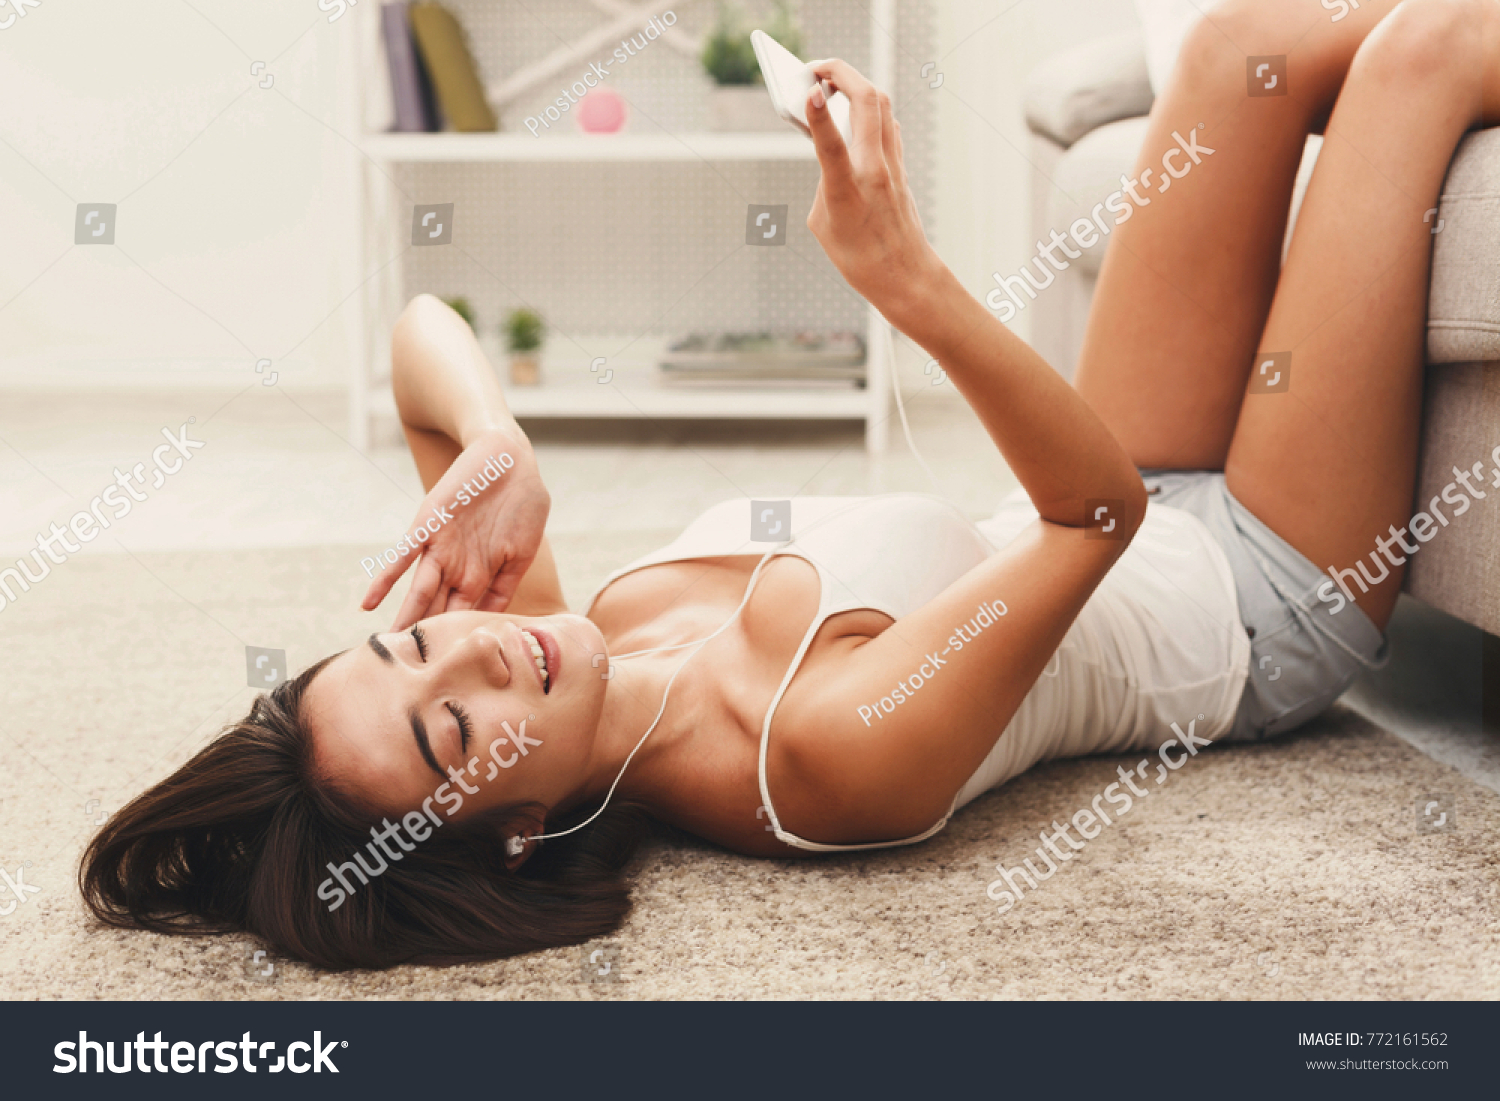 Young brunette woman enjoying the music in earphones and relaxing while lying at home on floor carpet, with her legs up on the sofa. Technology and enjoyment concept #772161562